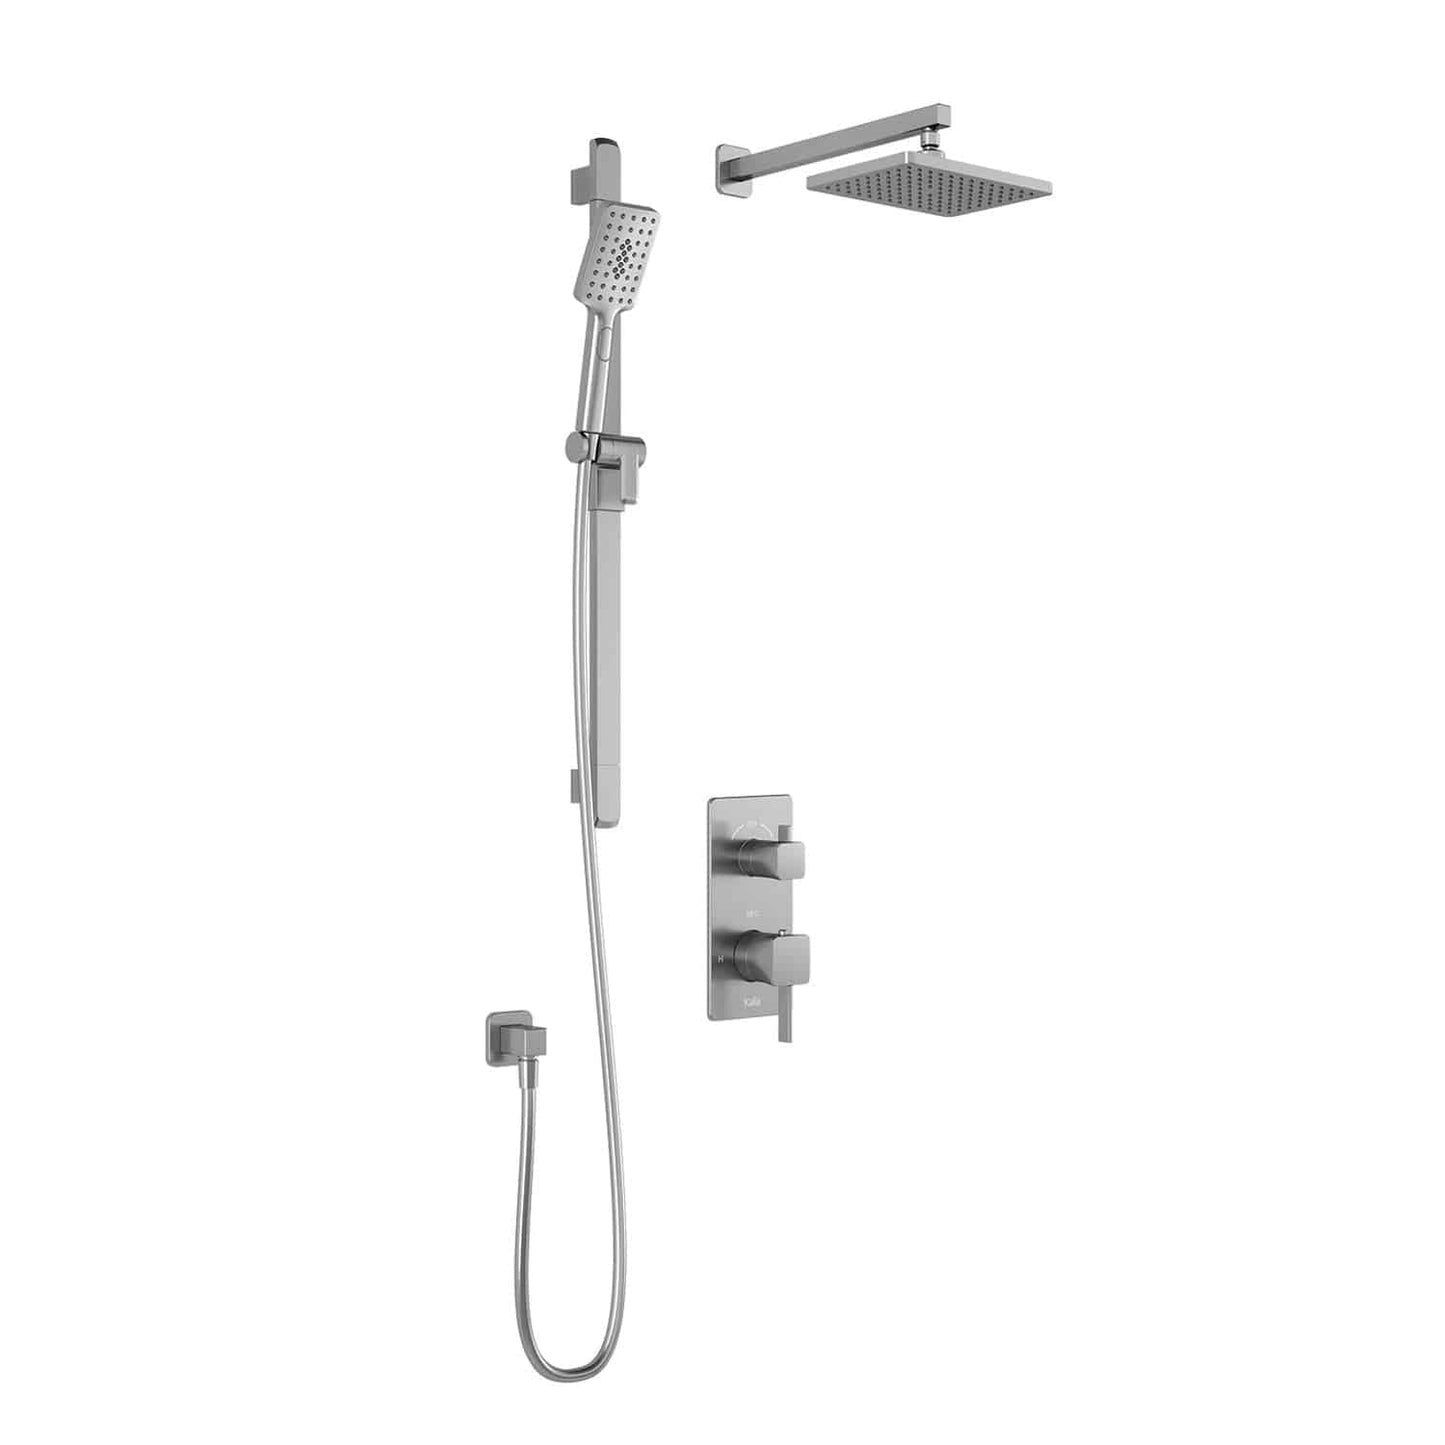 Kalia SquareOne TD2 AQUATONIK T/P with Diverter Shower System with 10-1/4" Shower Head with Wall Arm- Pure Nickel PVD